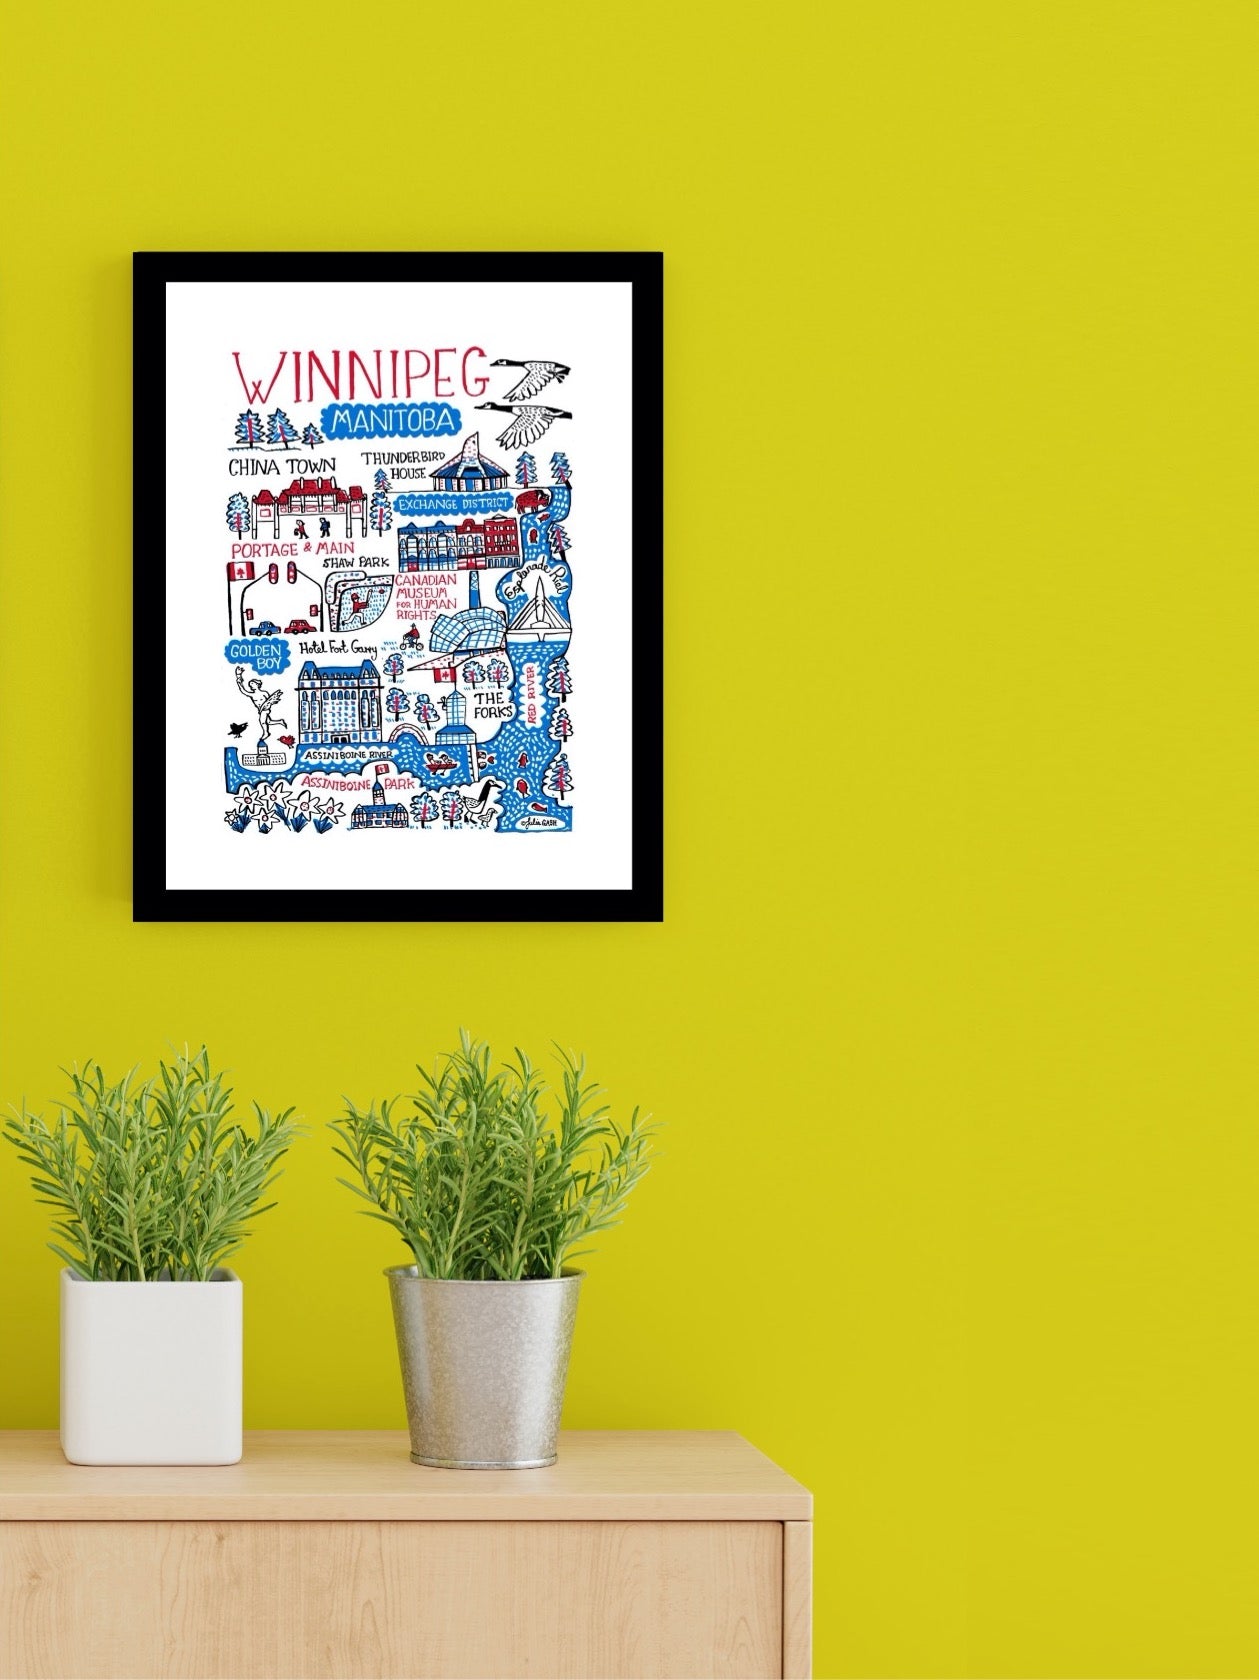 Winnipeg, Manitoba map illustration by Julia Gash featuring The Forks